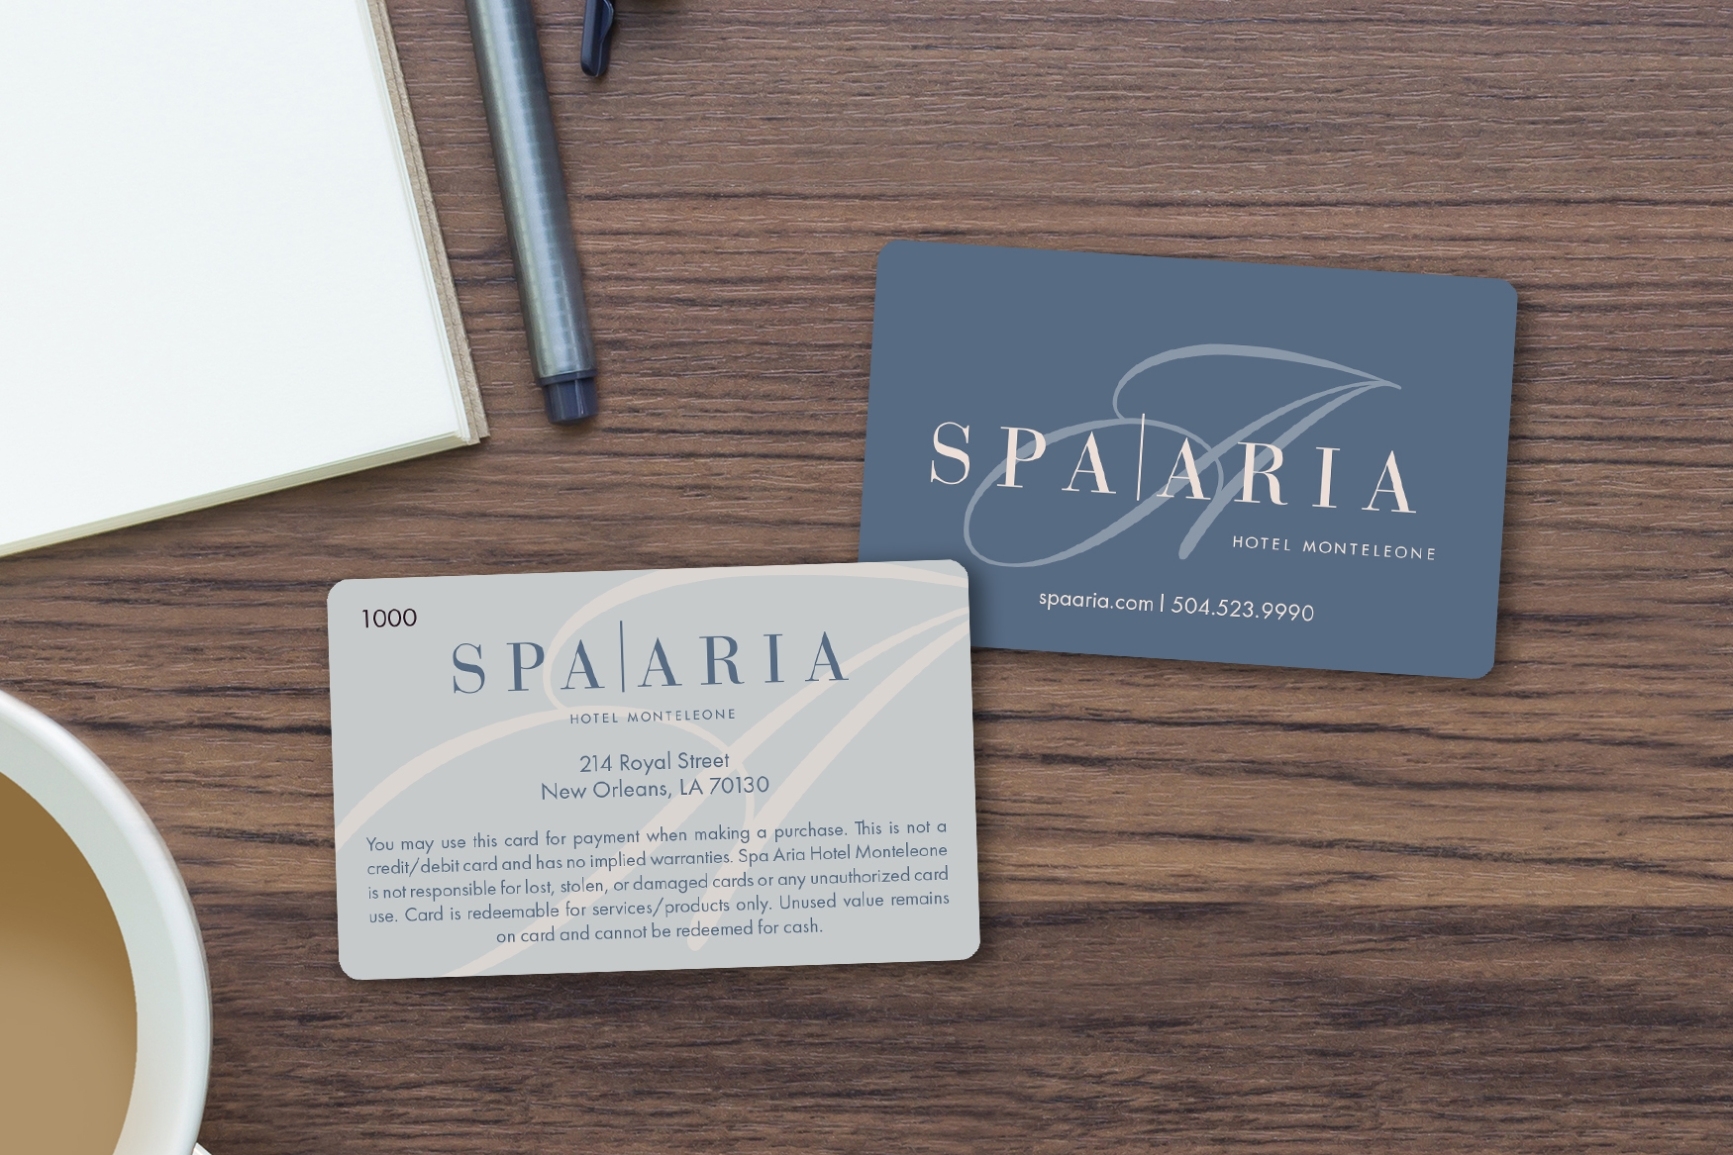 Spa Aria Hotel Monteleone Key Card With Hotel Key Card Template